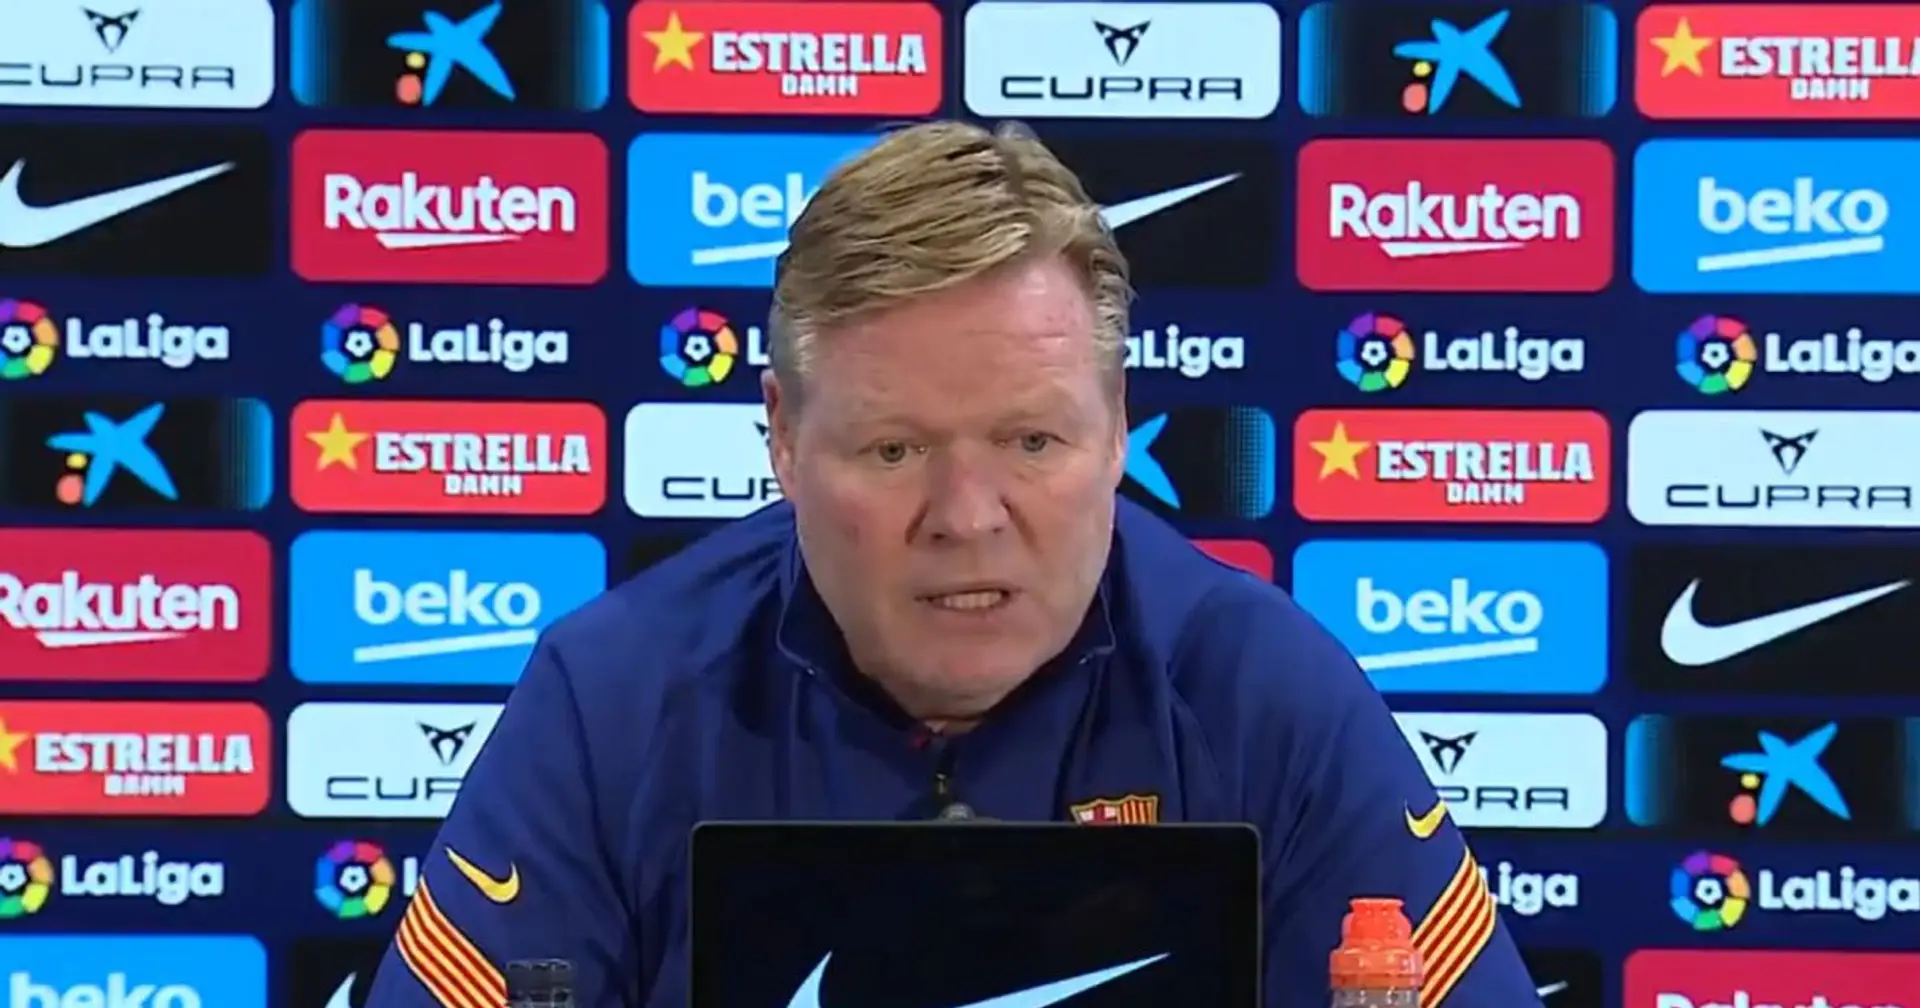 'We cannot think that it will be an easy game': Koeman refuses to write off Valladolid despite COVID attack